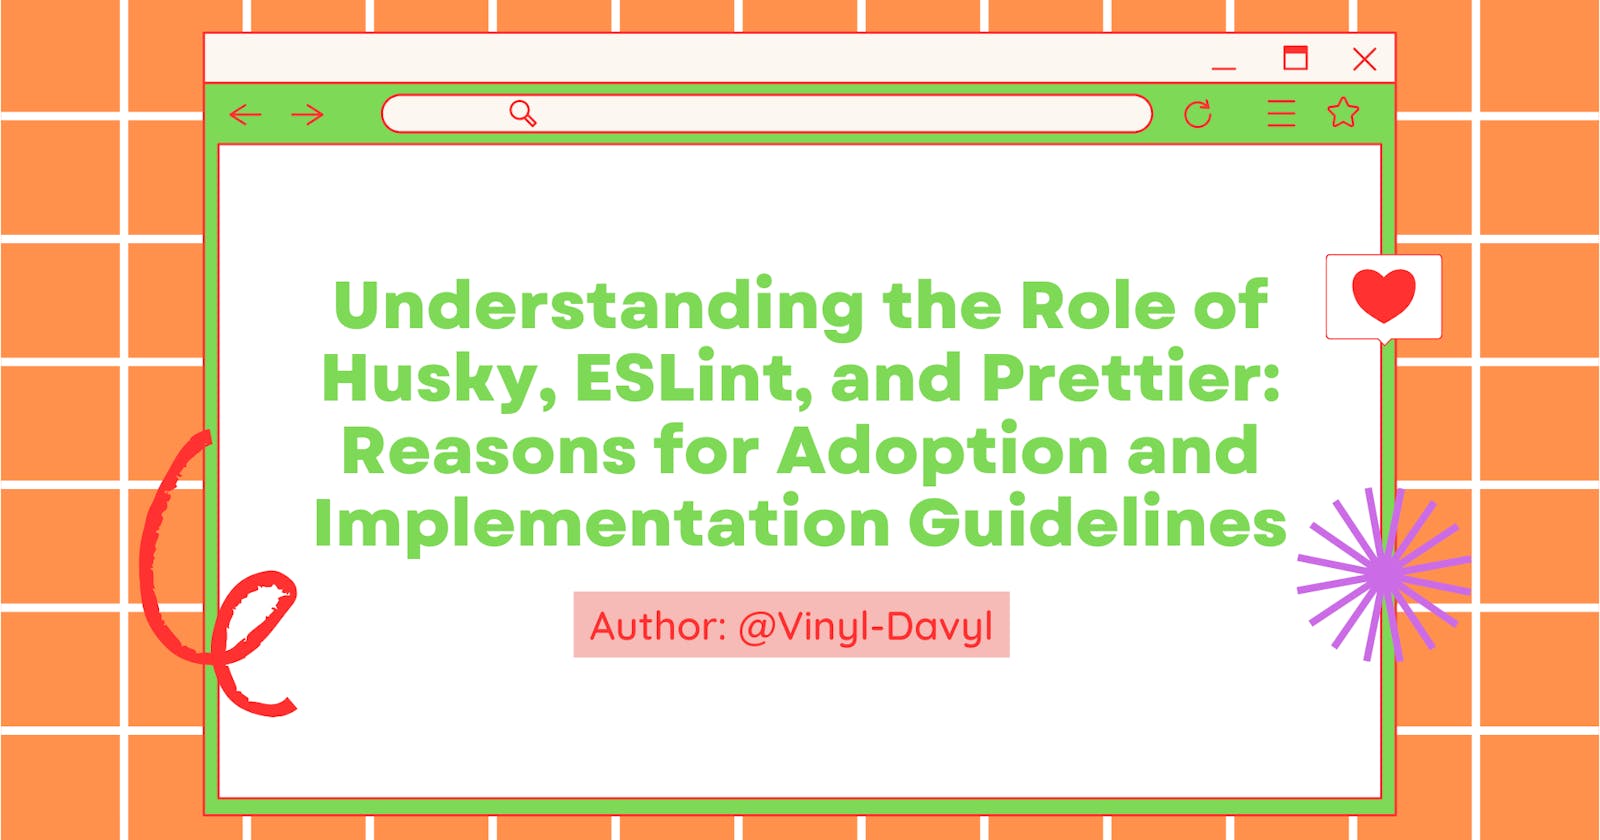 Understanding the Role of Husky, ESLint and Prettier: Reasons for Adoption and Implementation Guidelines